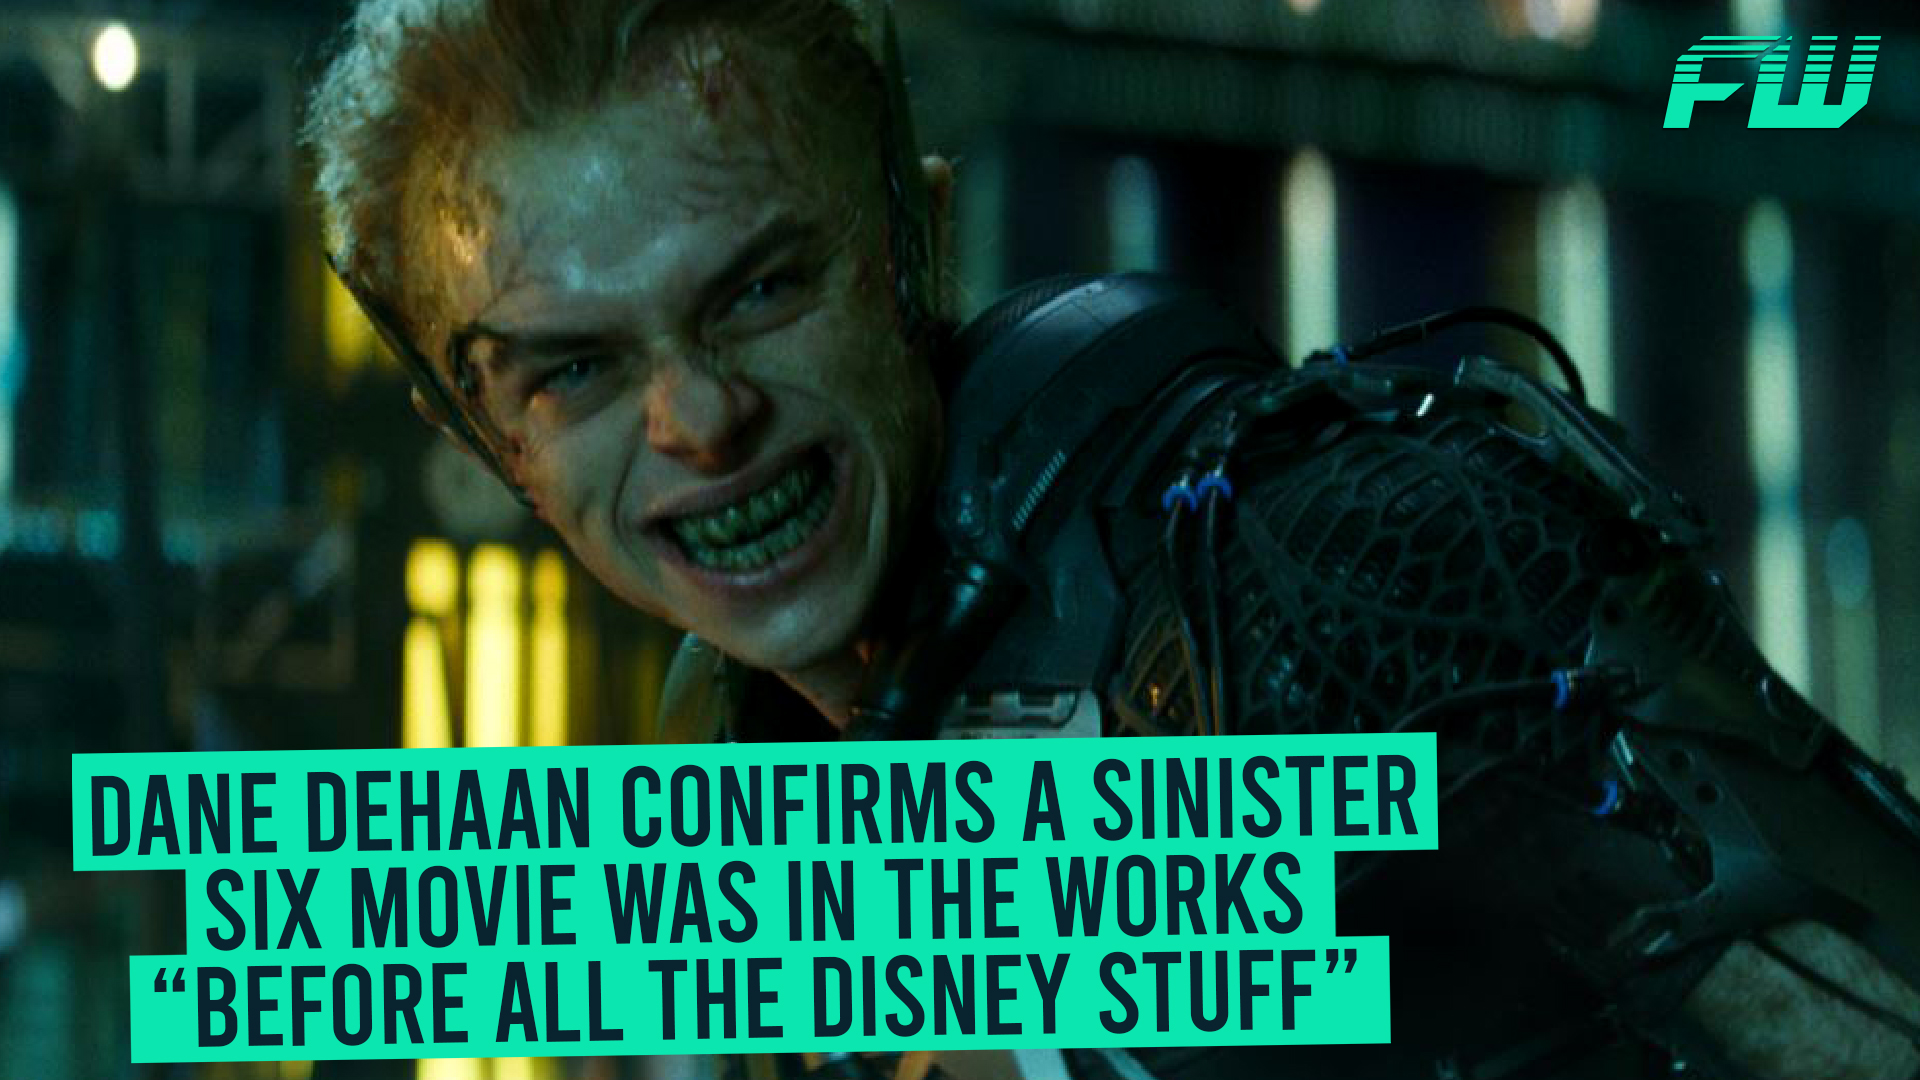 Dane DeHaan Confirms a Sinister Six Movie Was in the Works “Before All the Disney Stuff”